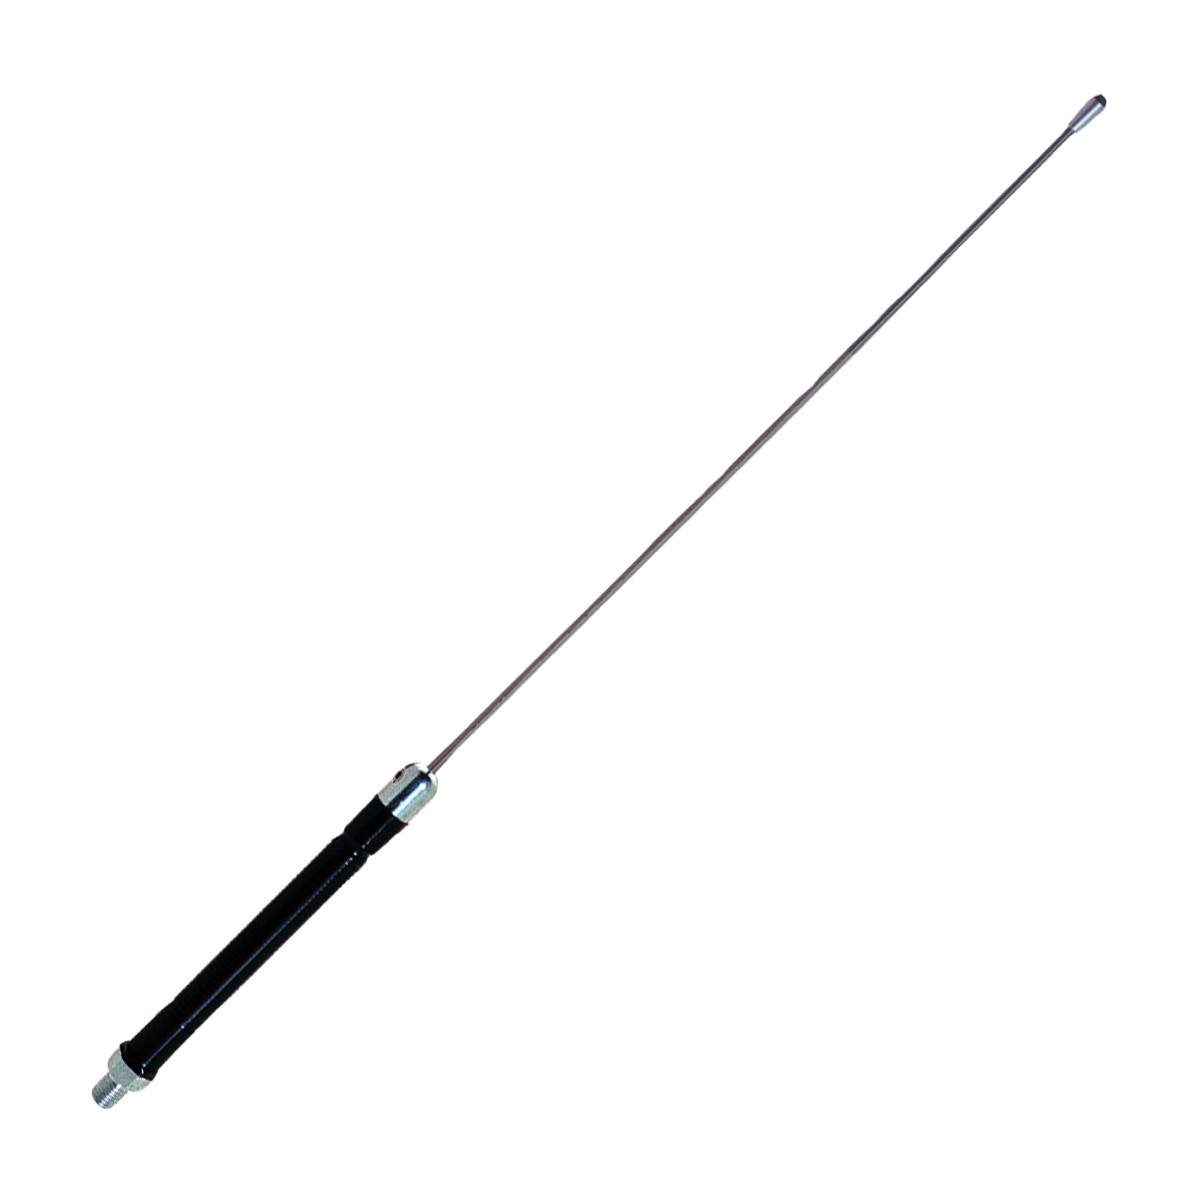 CB Antennas | Product categories | Pana Pacific | Page 3